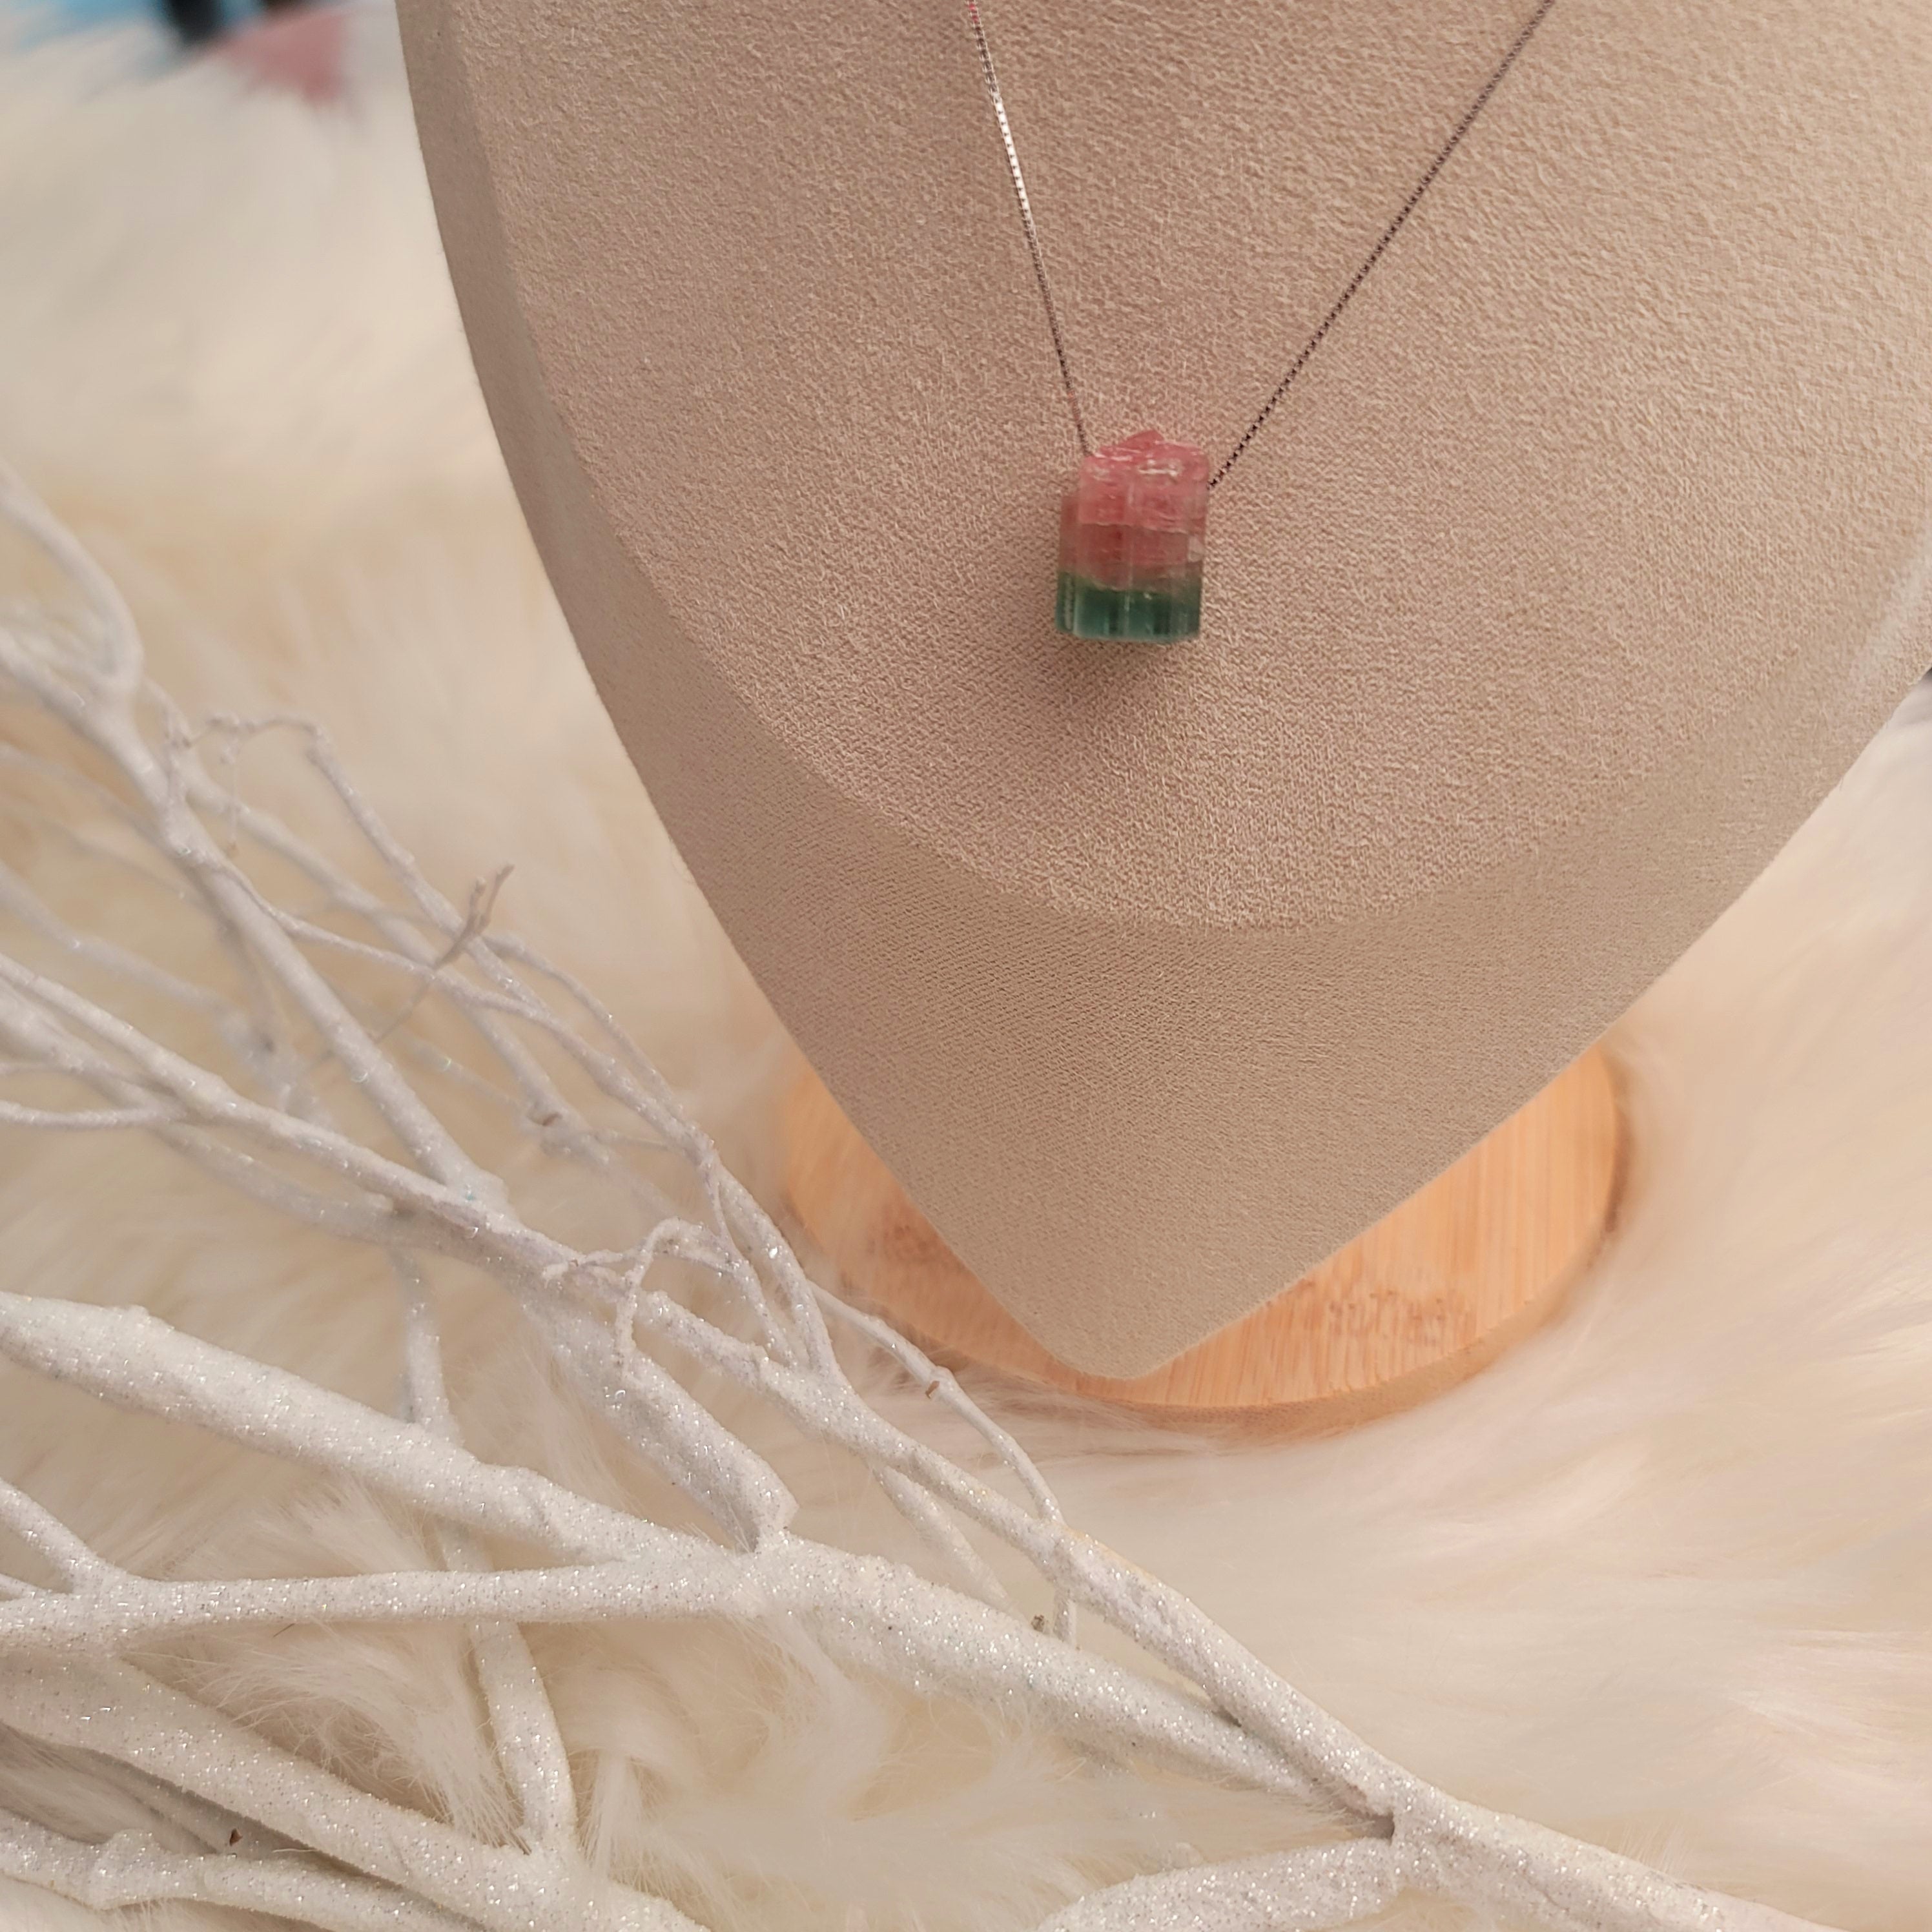 Cotton Candy Tourmaline Pendant for Emotional Healing, Joy and Manifesting Love